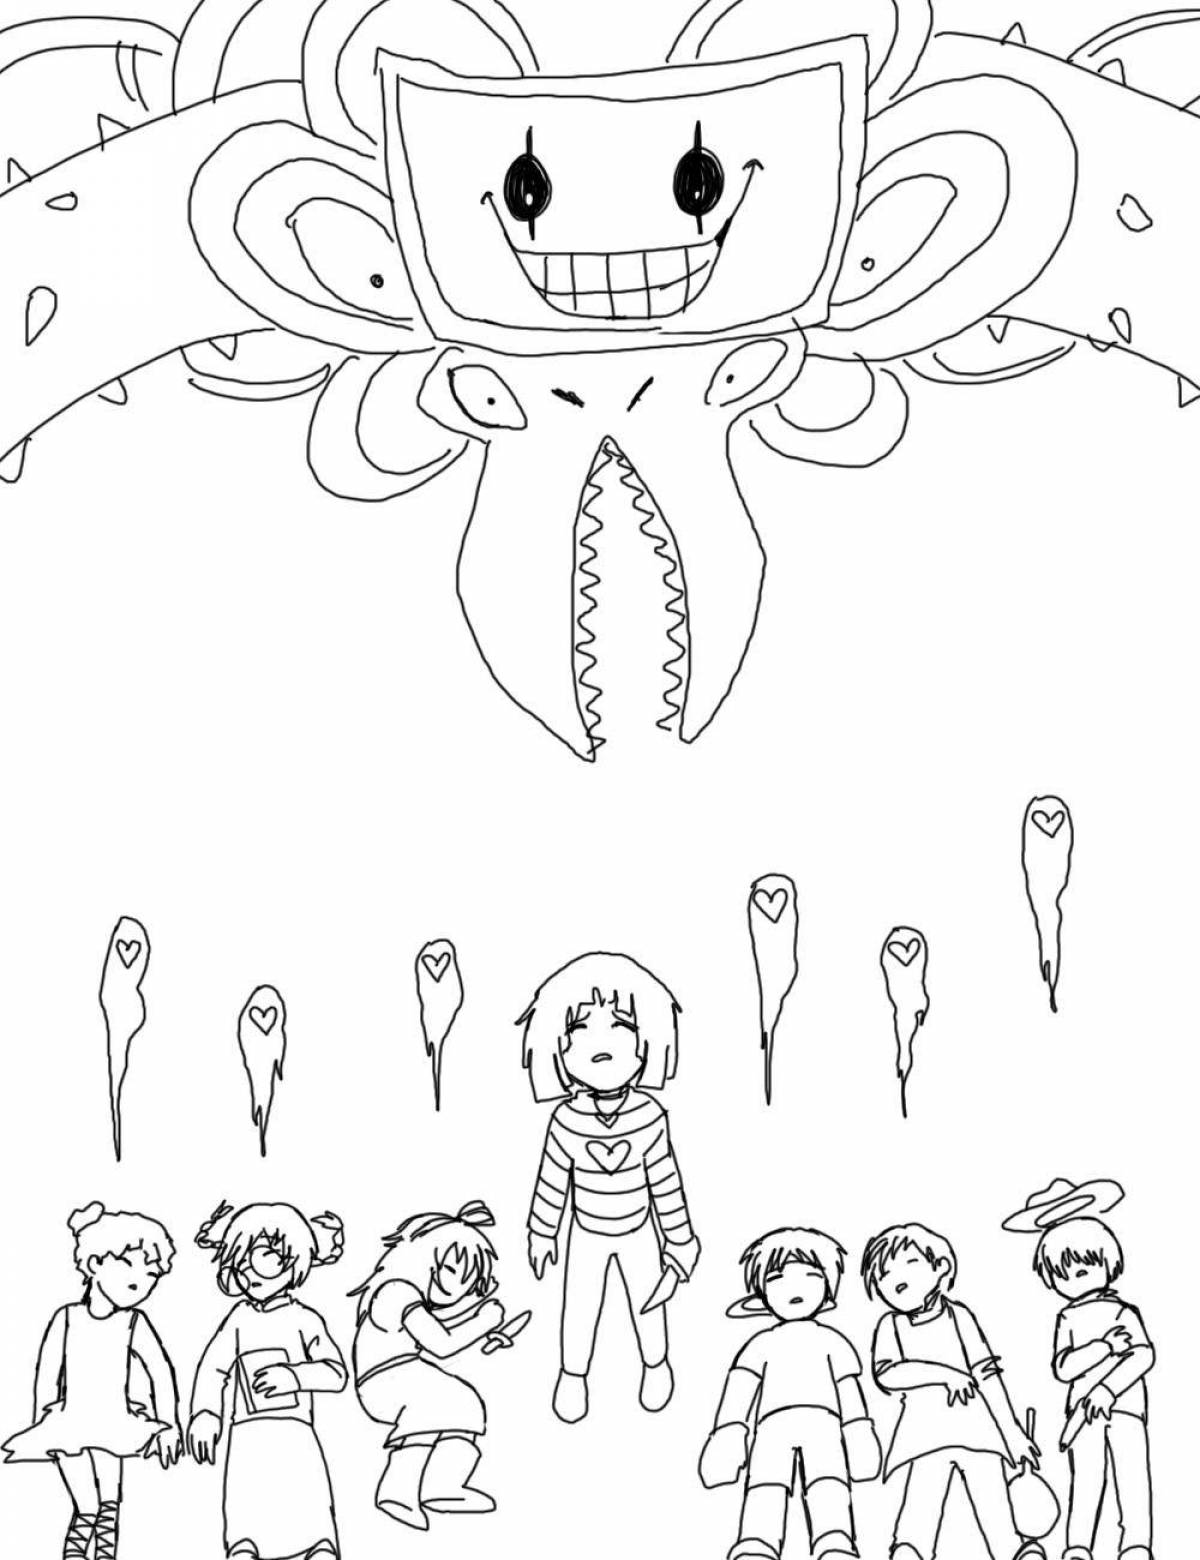 Fascinating undertale coloring by numbers